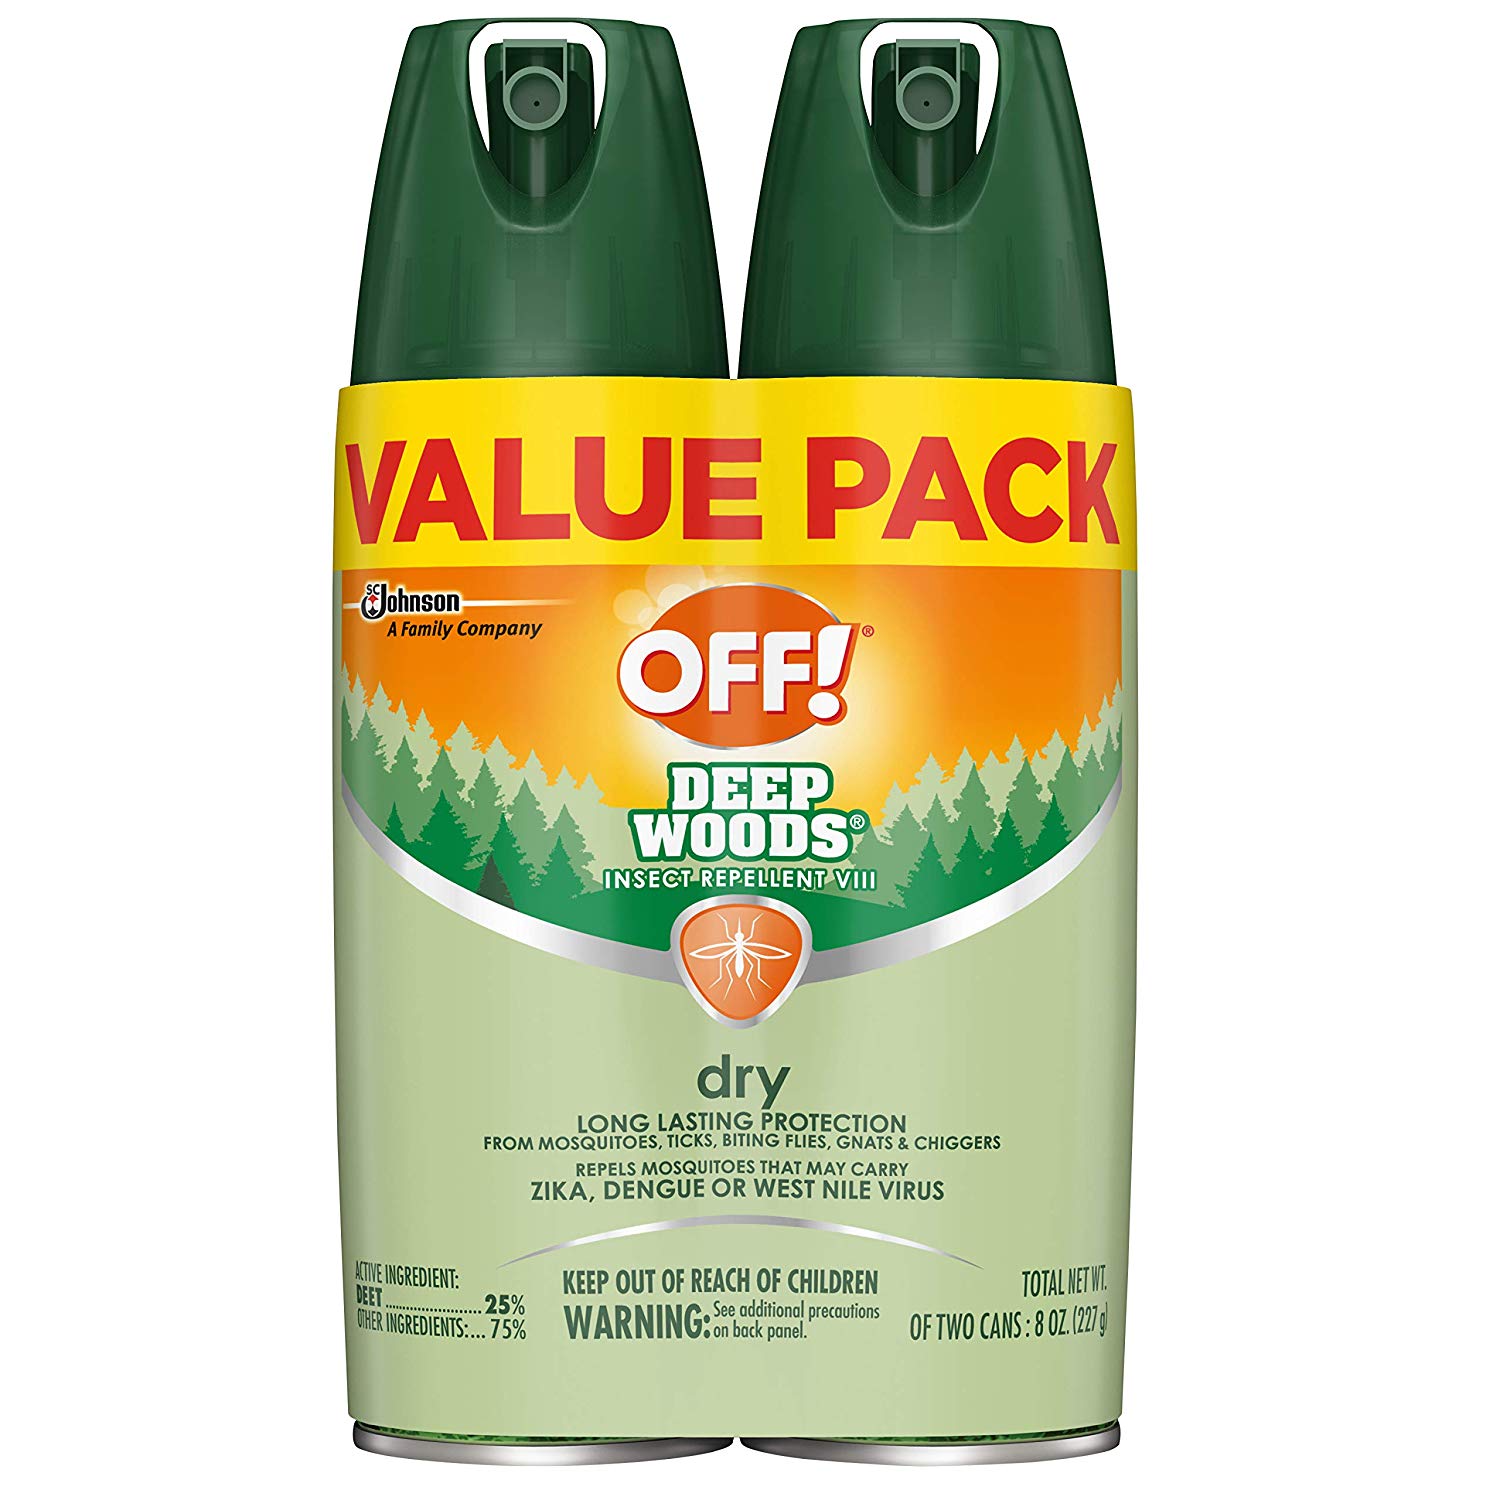 OFF! Deep Woods Insect Repellent VIII Dry (2 Pack) Only $8.57!